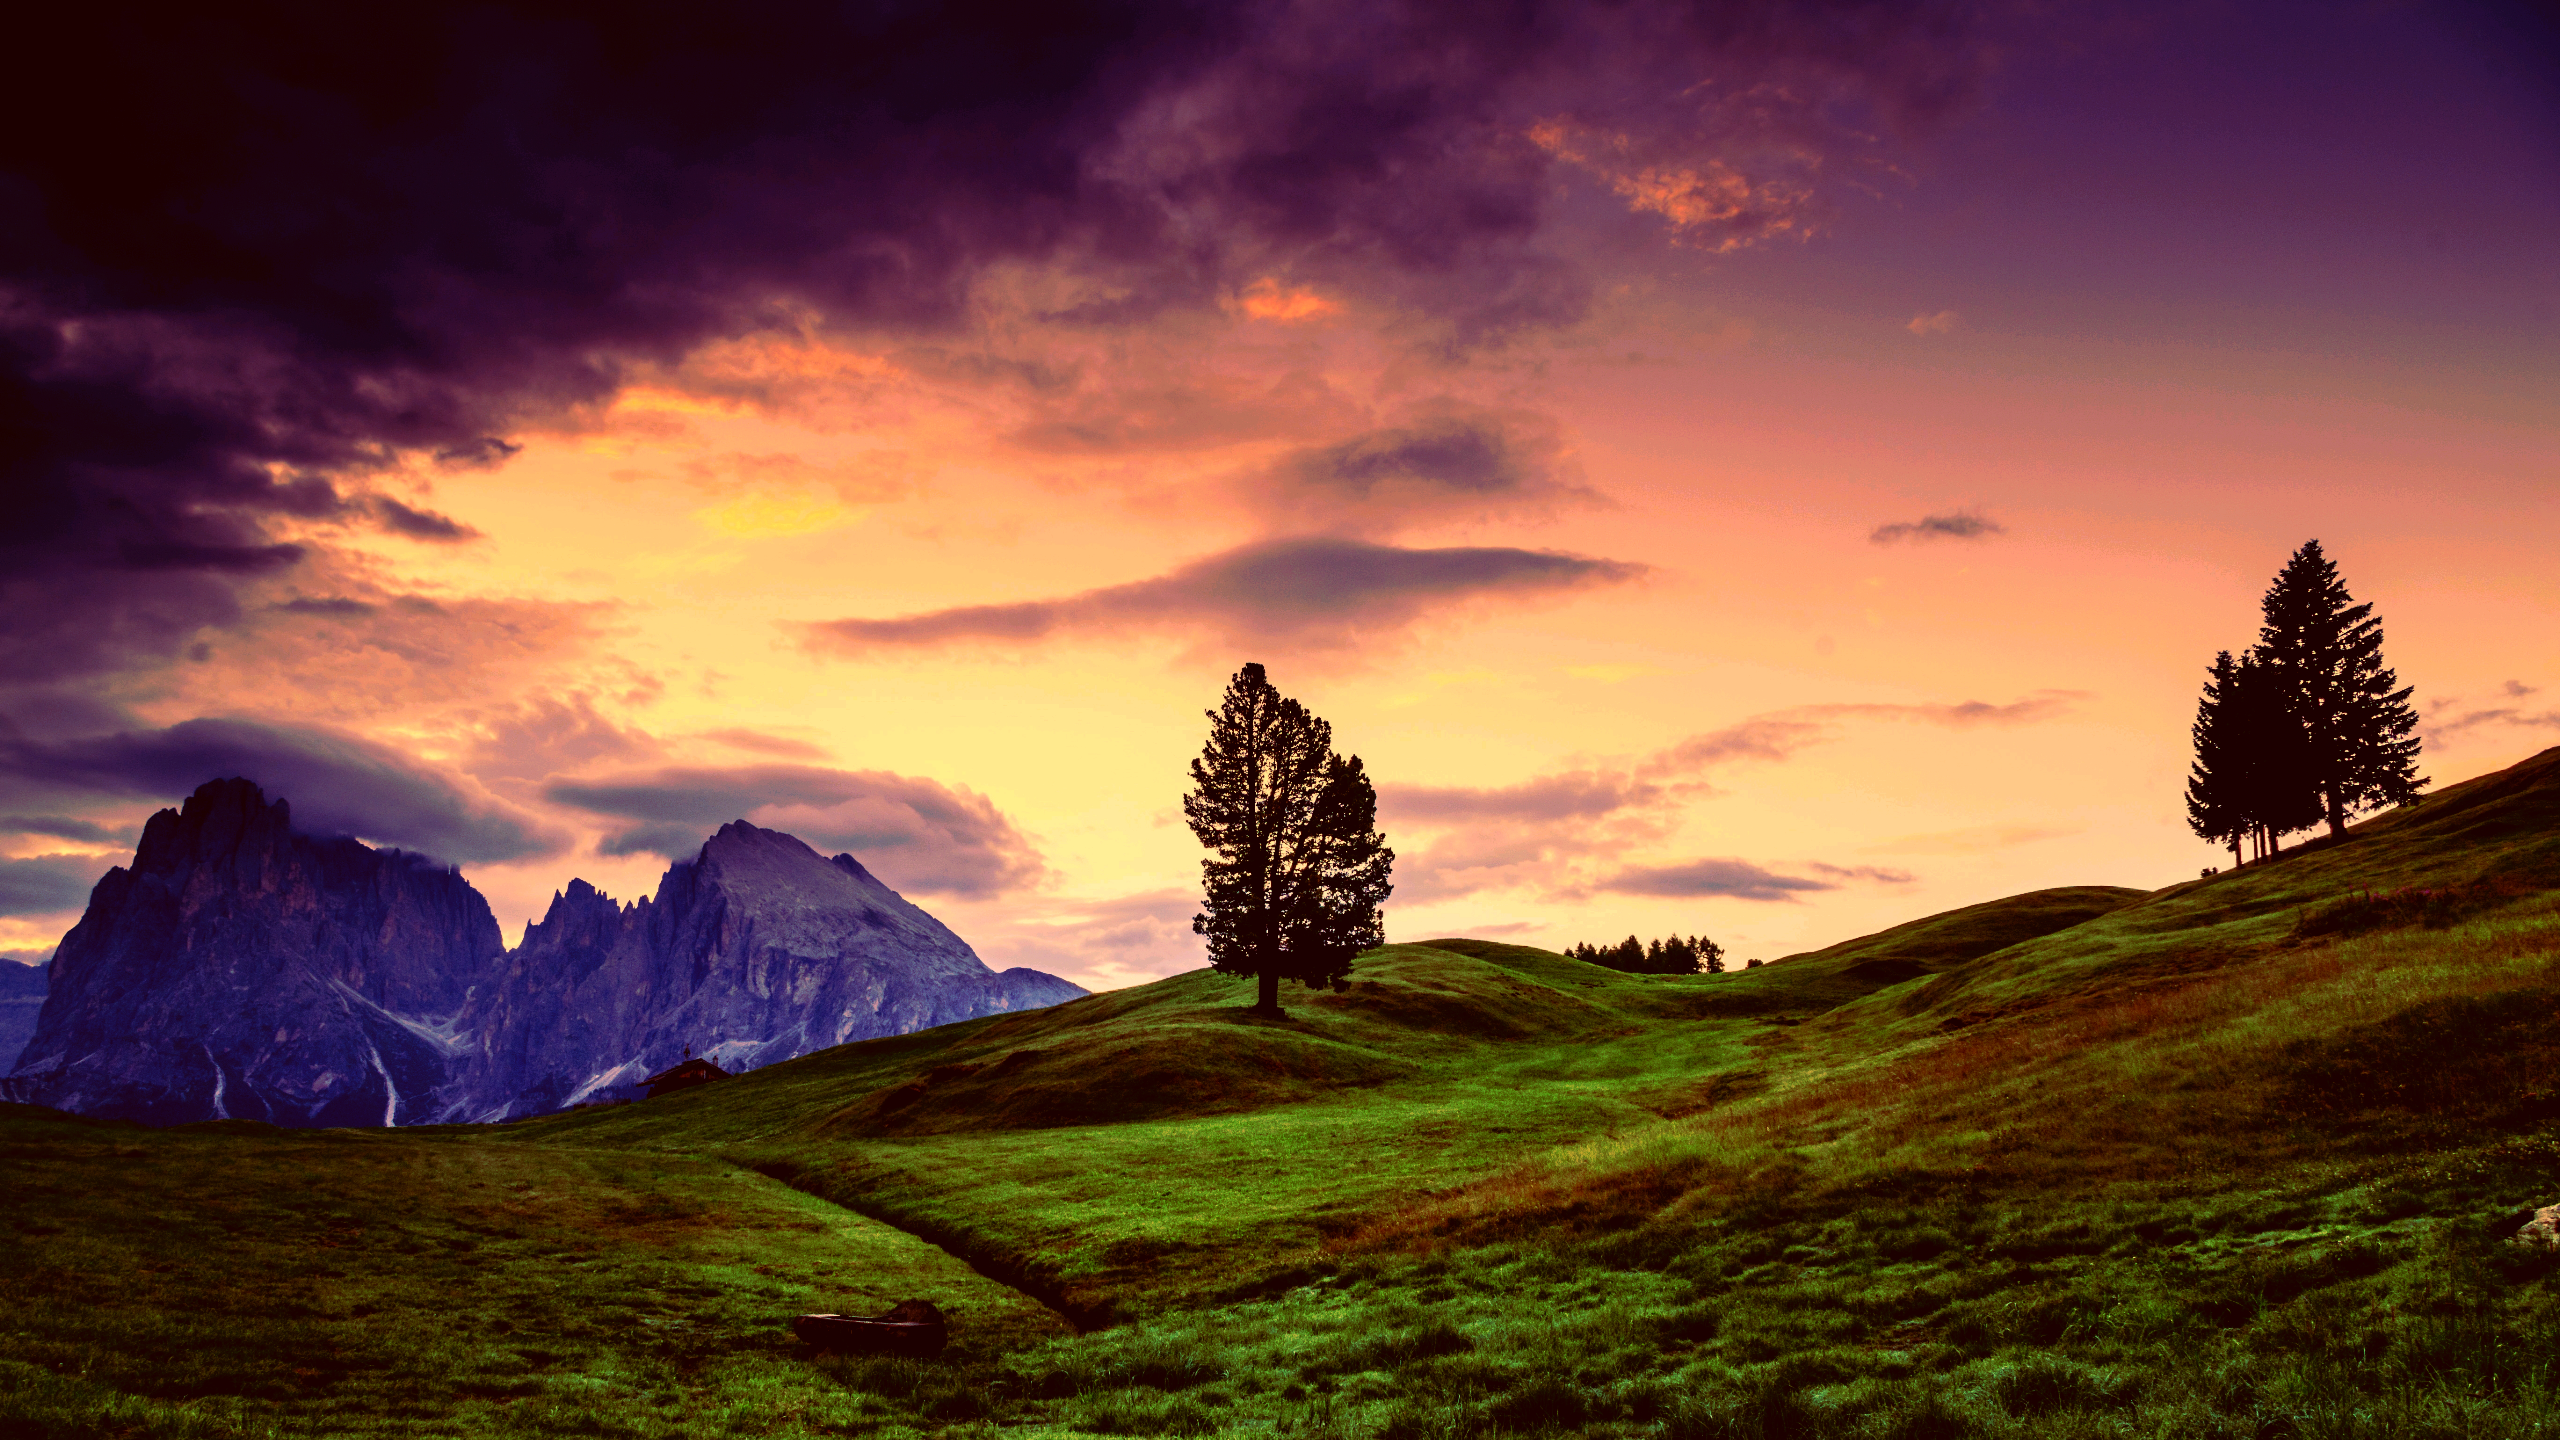 General 2560x1440 landscape mountains green grass hills trees sky clouds purple storm stones colorful